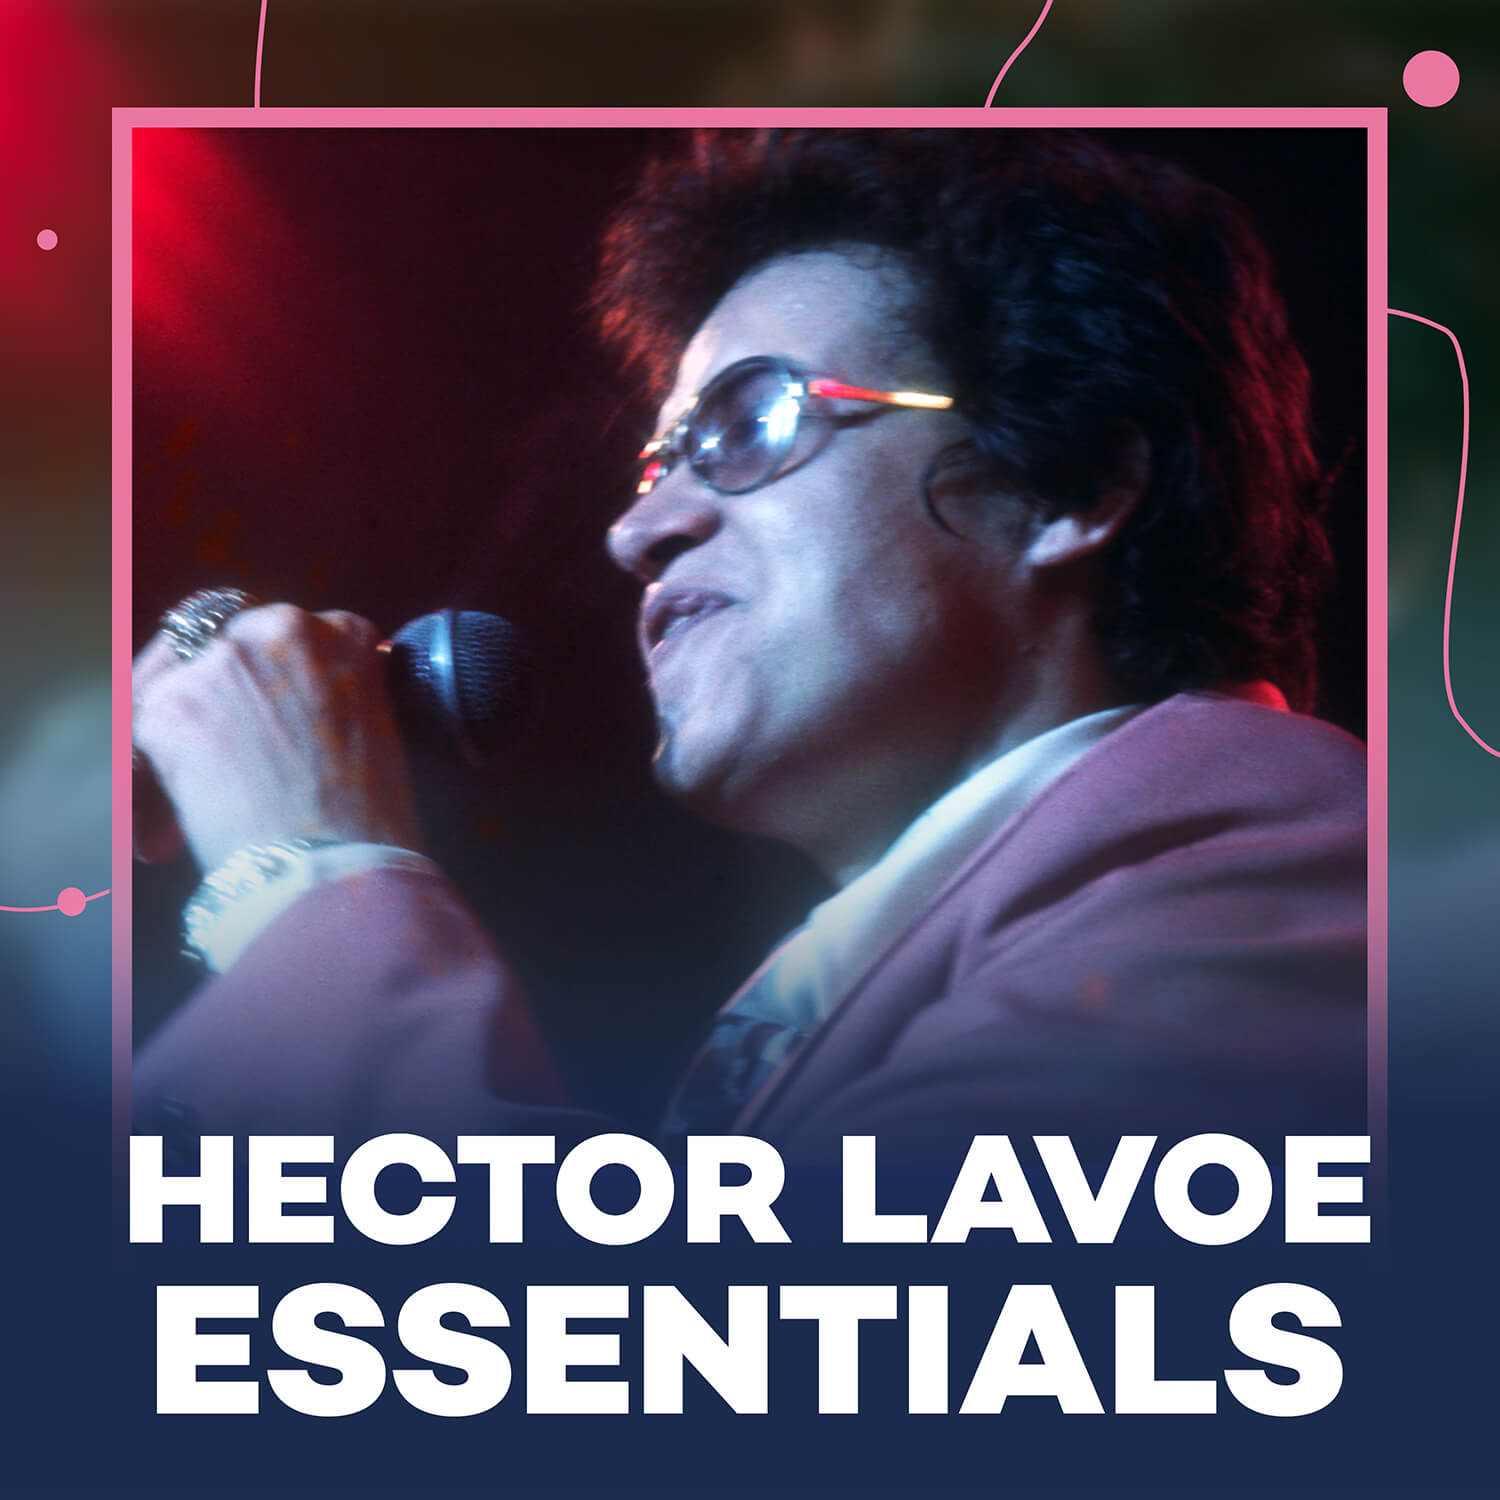 Featured image for “Hector Lavoe”